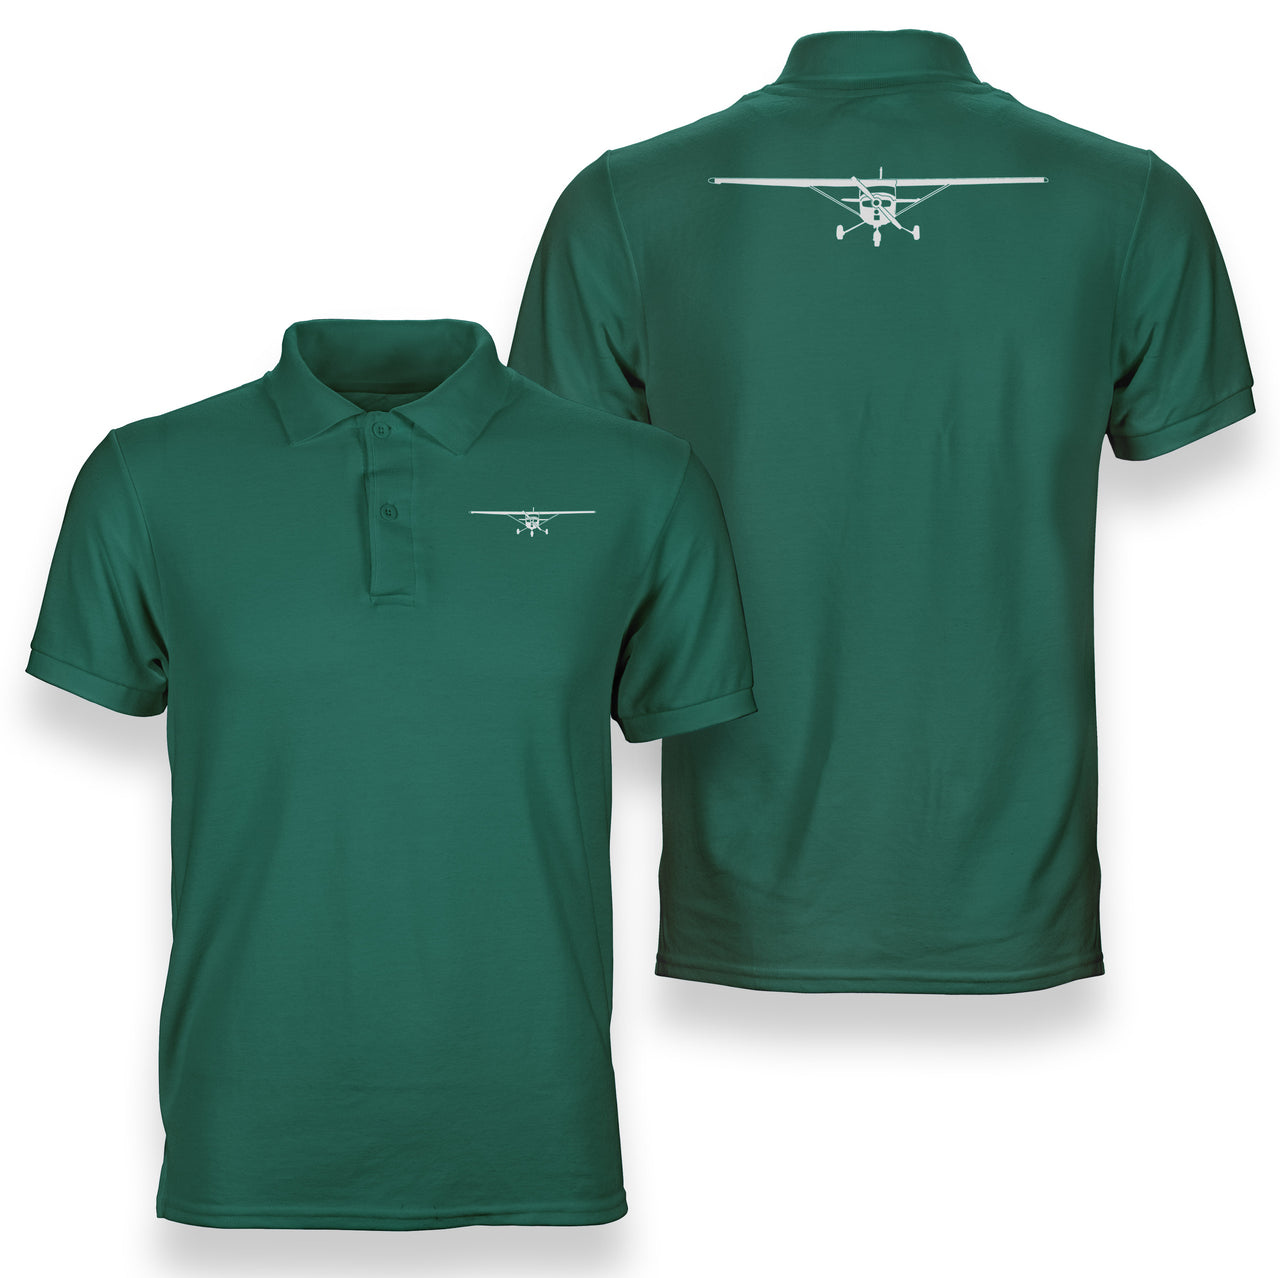 Cessna 172 Silhouette Designed Double Side Polo T-Shirts